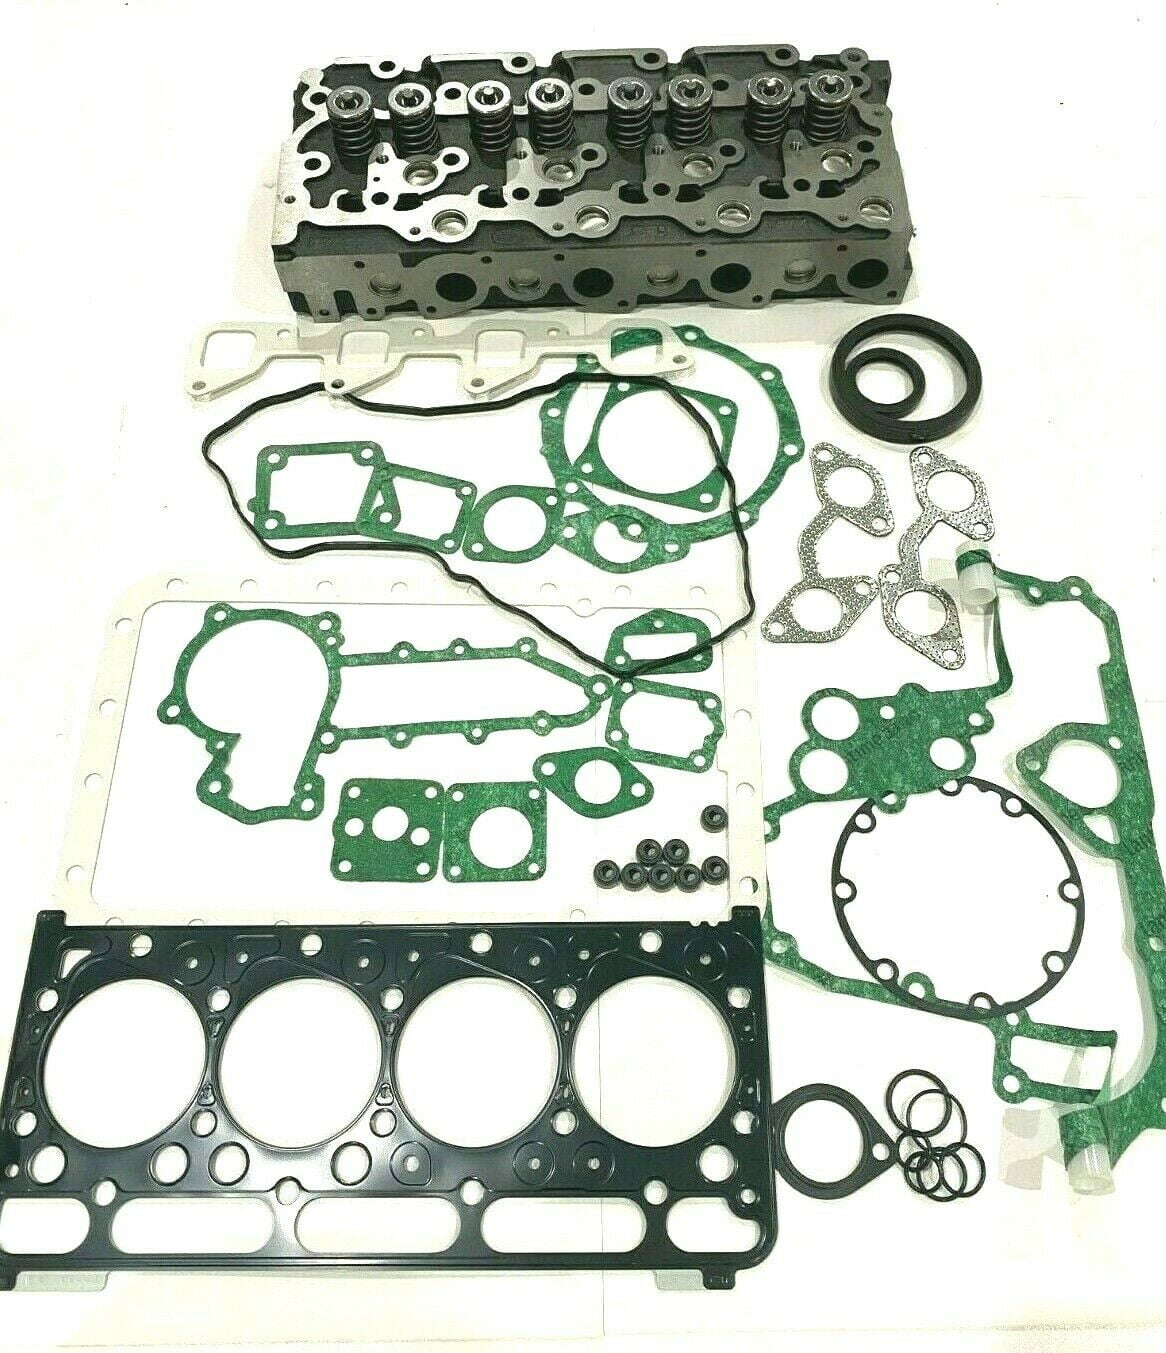 16429-0304 Cylinder Head Complete with Full Gasket Set Replacement Fits for Kubota  V2203 V2203T V2203E V2203B V2203-M-DI STD